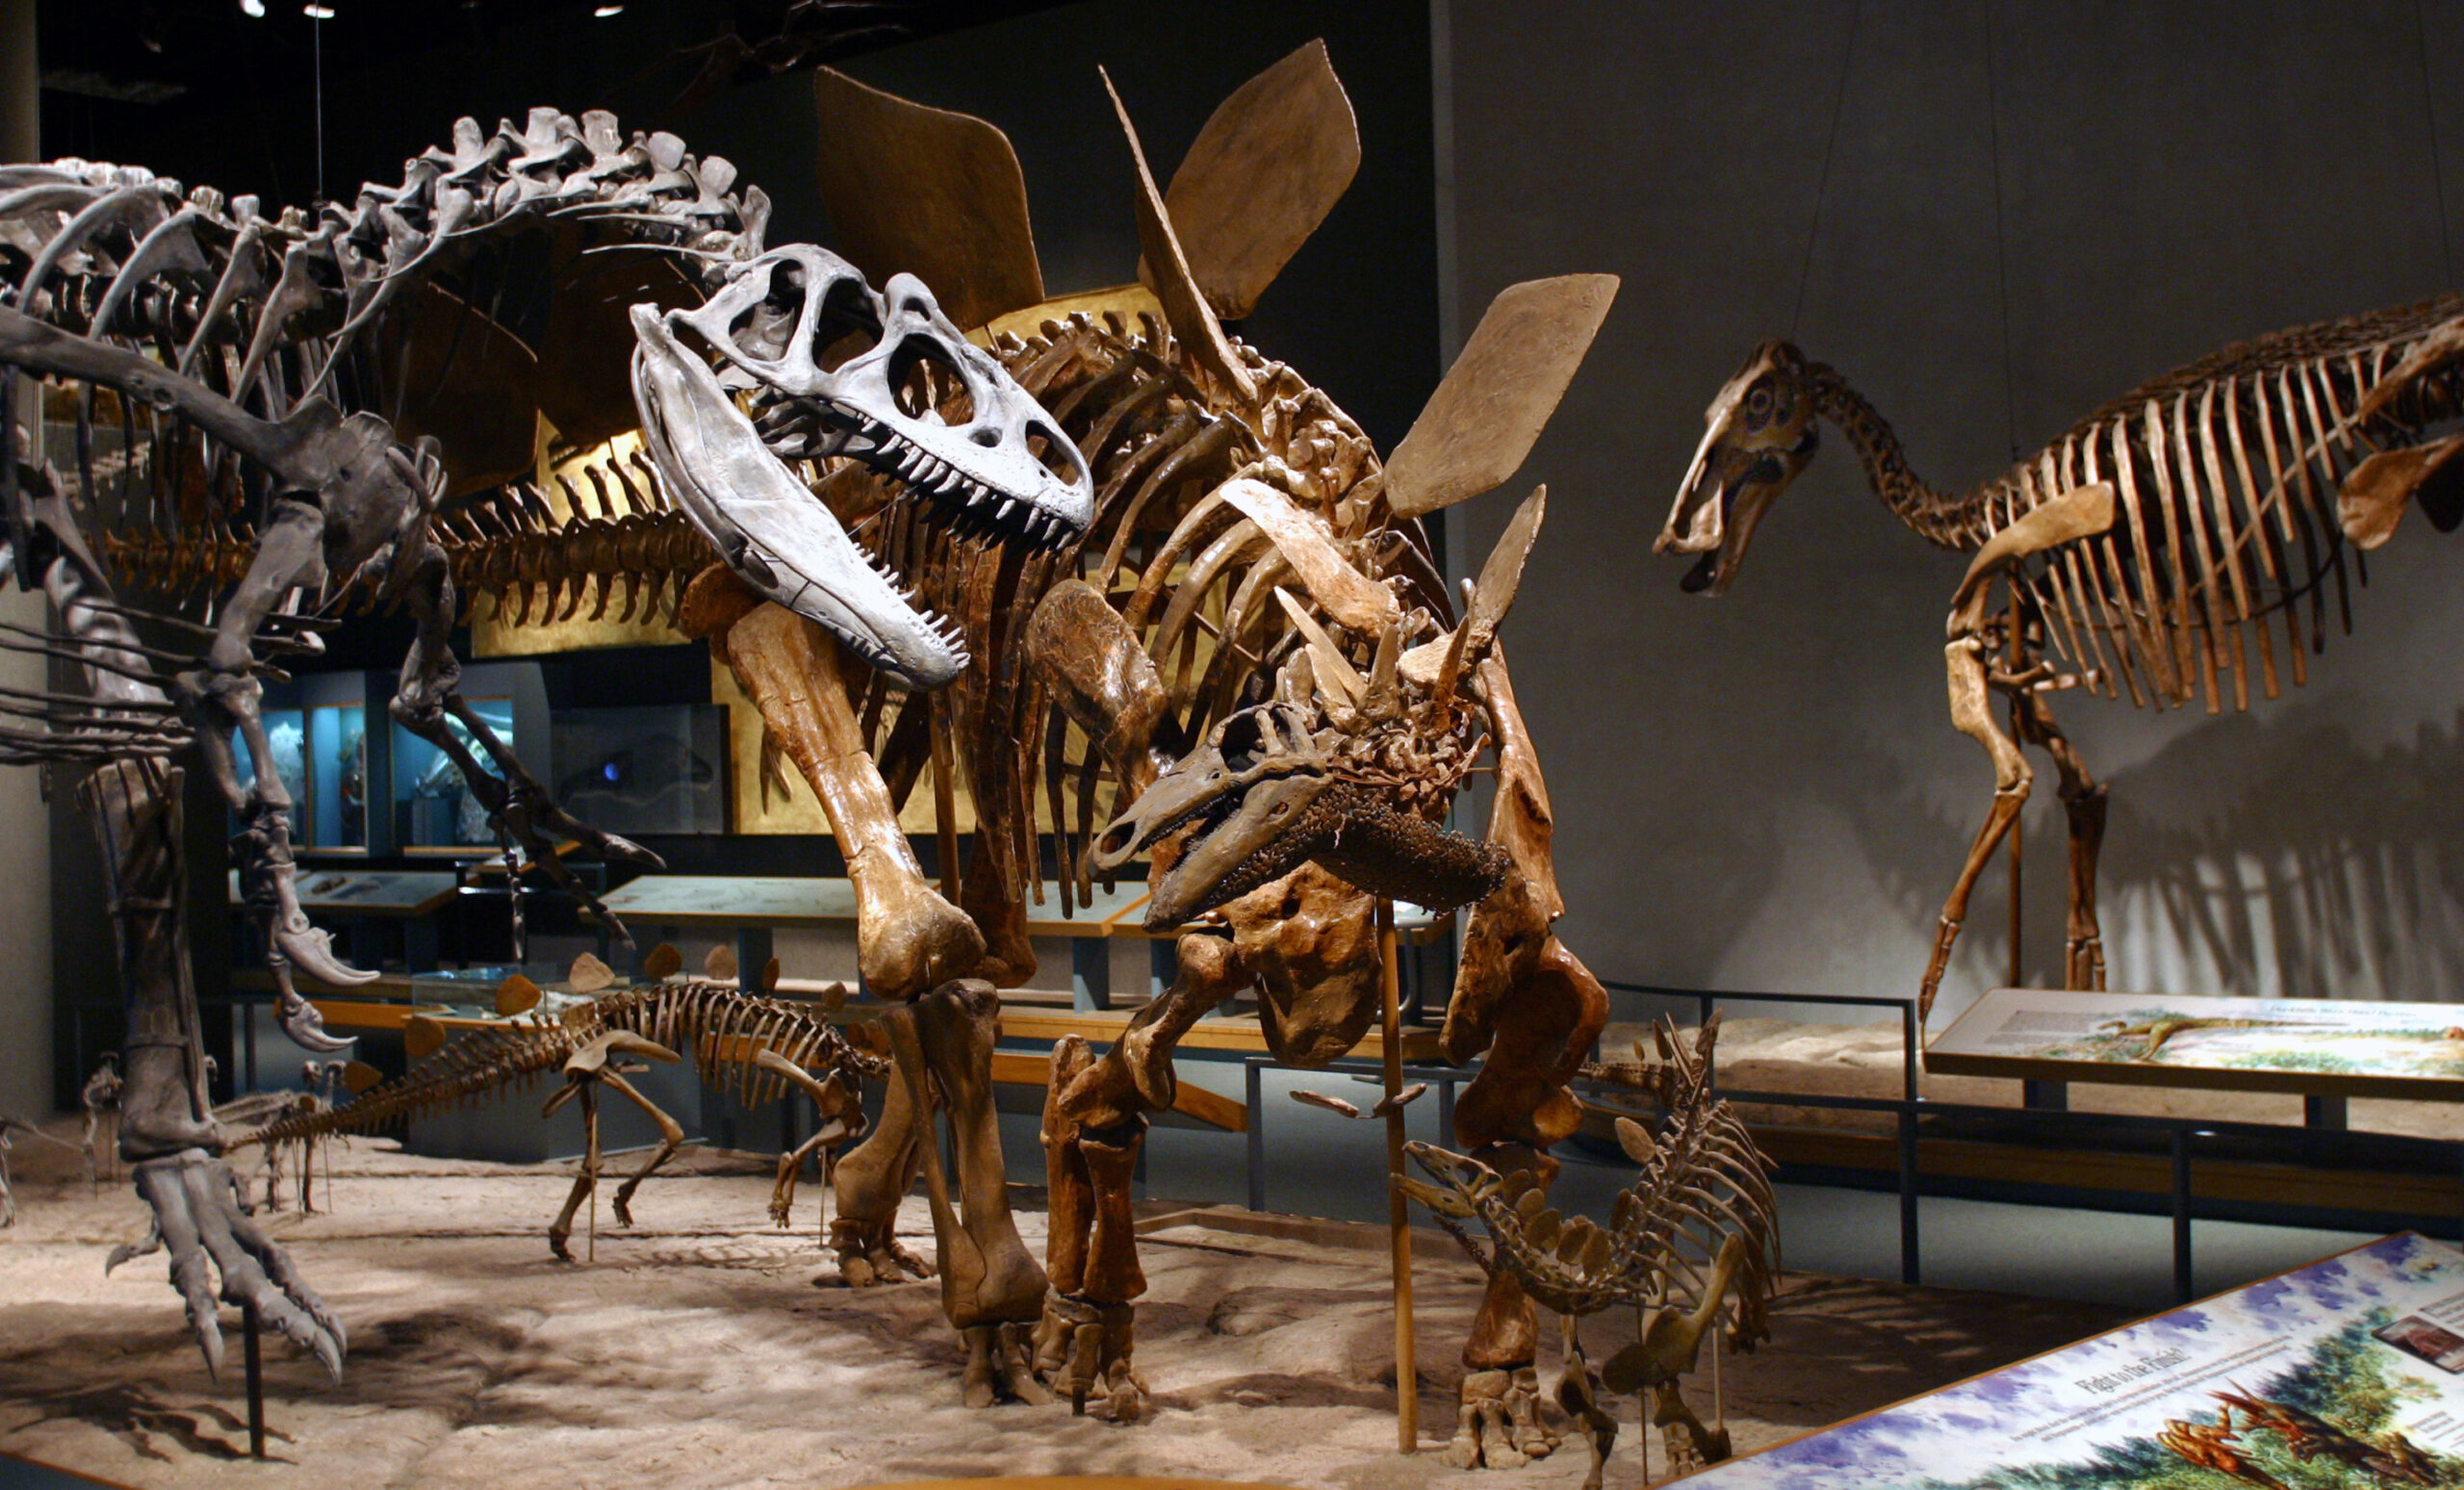 Enjoy free admission to the Denver Museum of Nature & Science this weekend thanks to 98.5 KYGO!